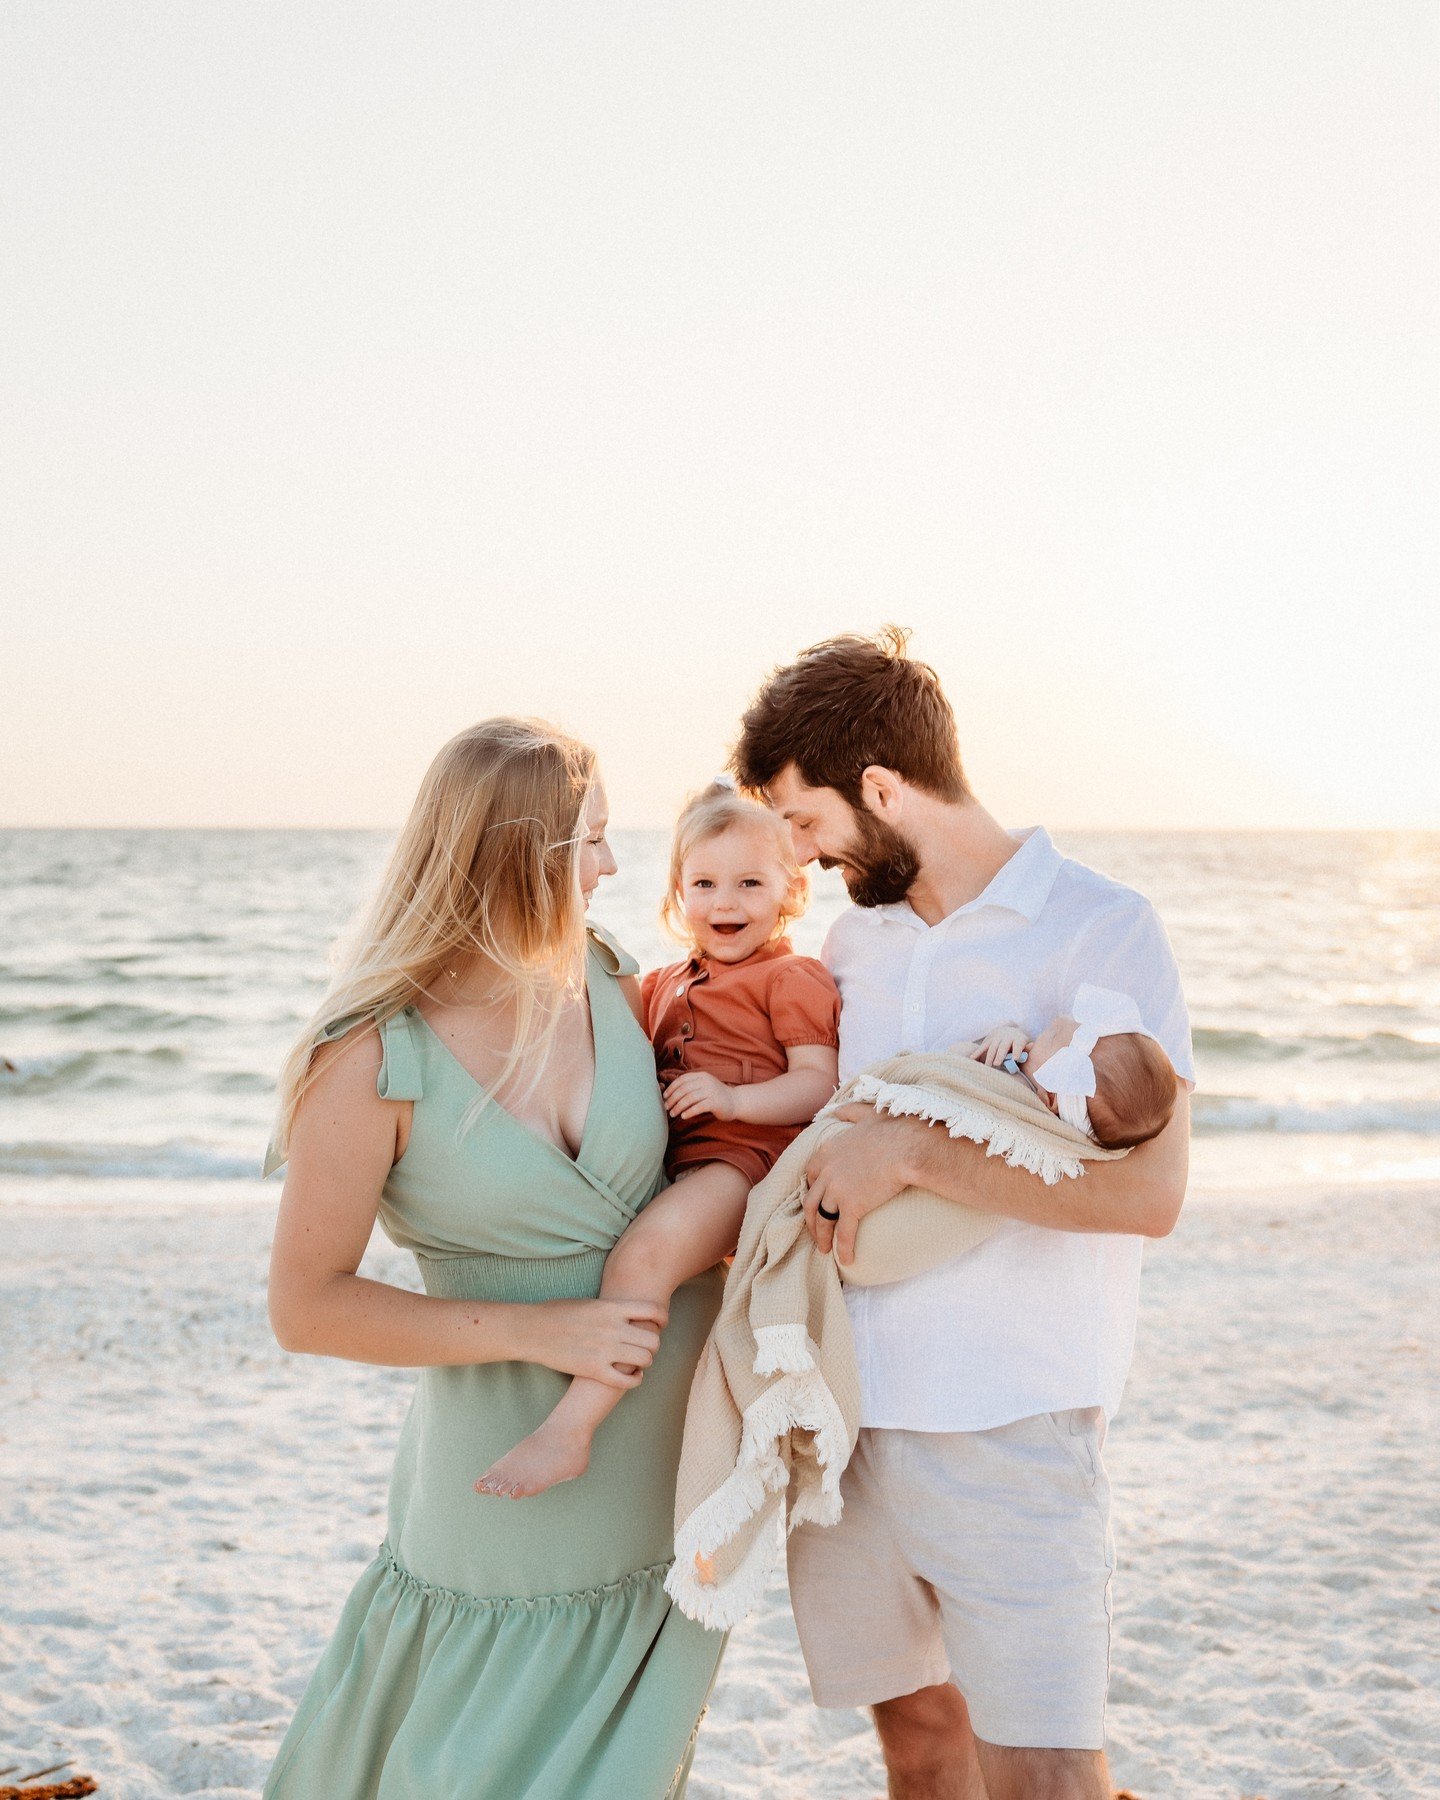 Just in case you thought I turned into a wedding photographer - here's a sweet family to tell you otherwise!

#familyphotographer #allisonunionphoto #fortmyersfamilies #fortmyersflorida #naplesflorida #esterophotographer #fortmyersfl #fortmyersphotog